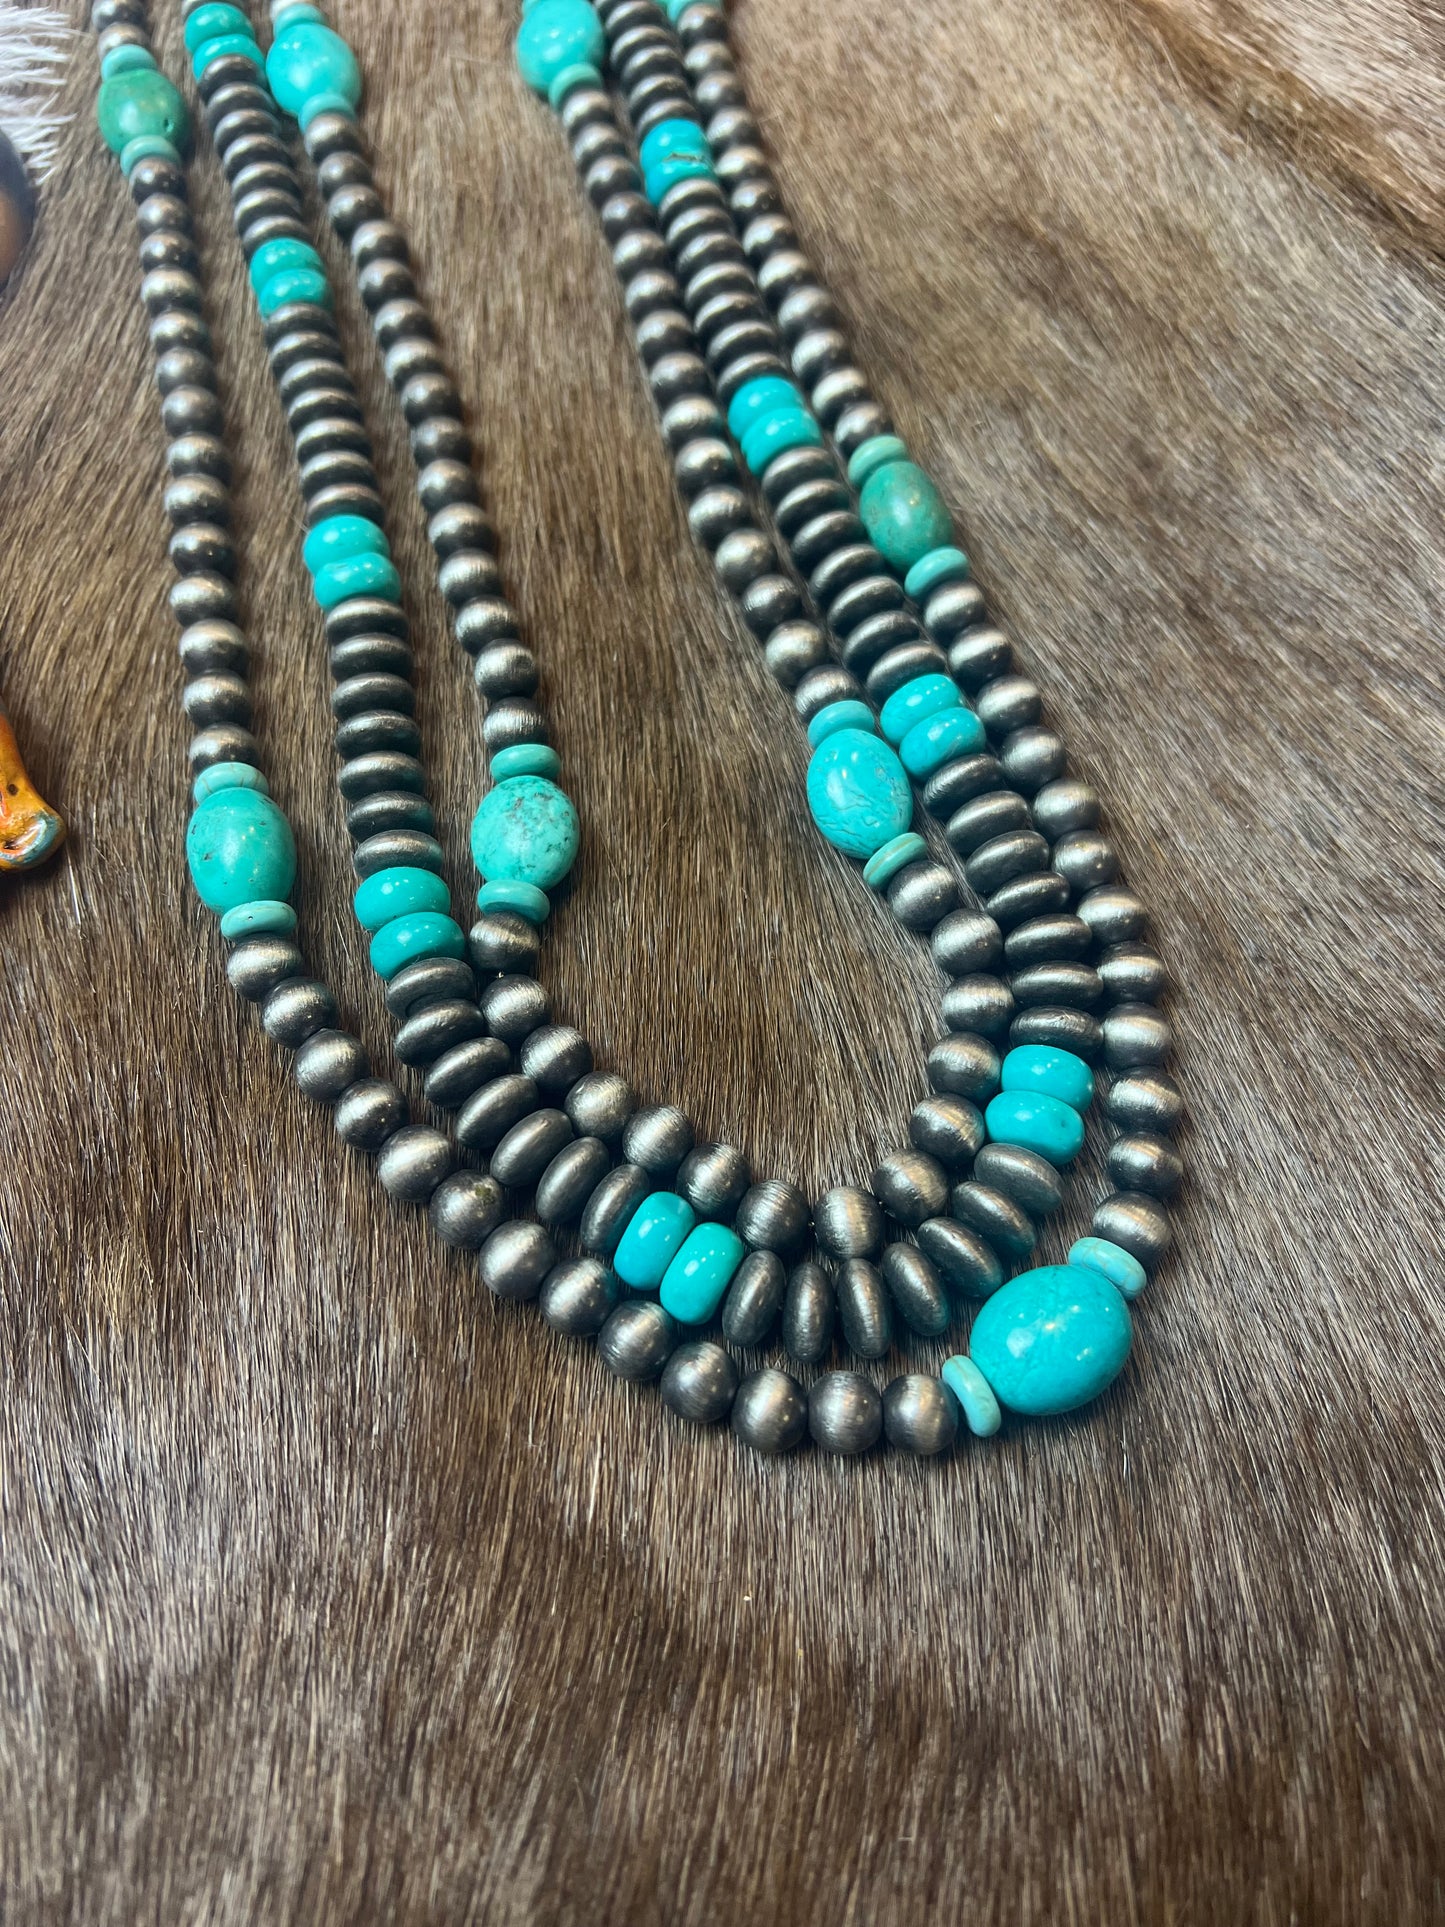 Tri-Strand Silver Beaded Necklace with Turquoise Stones